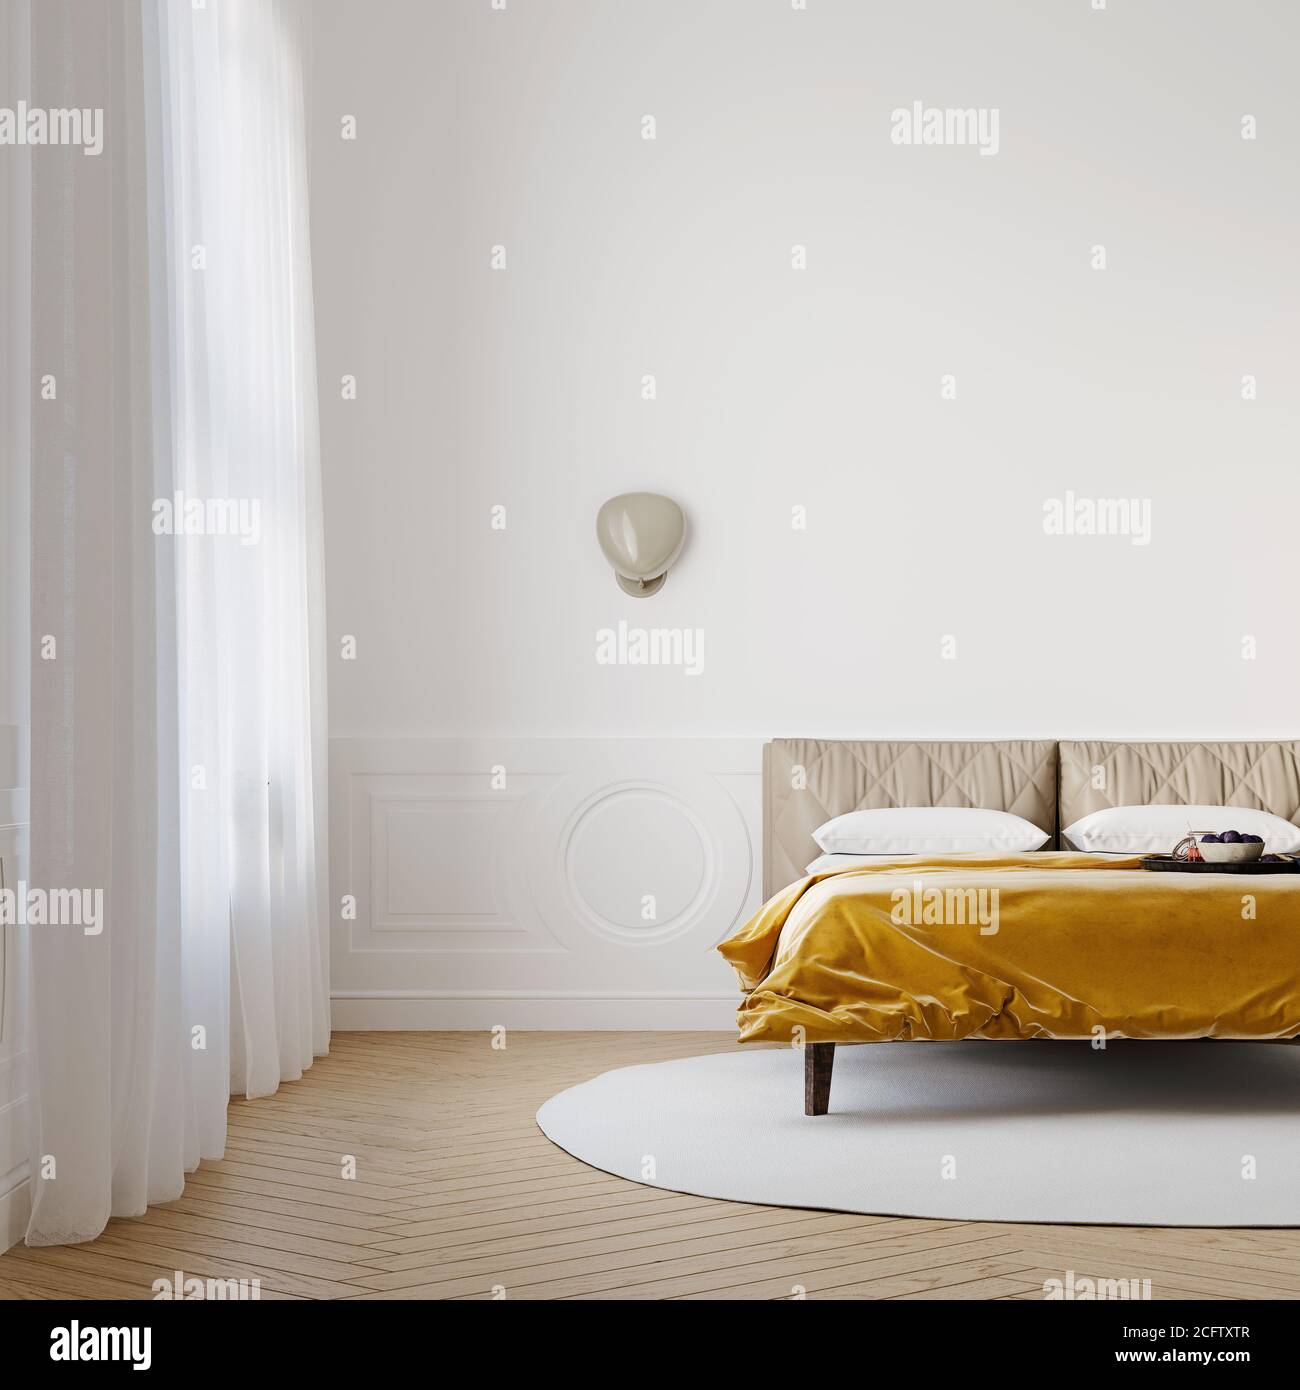 Brightly lit bedroom with vibrant gold color bedspread, mock-up with negative space, 3d render, 3d illustration Stock Photo